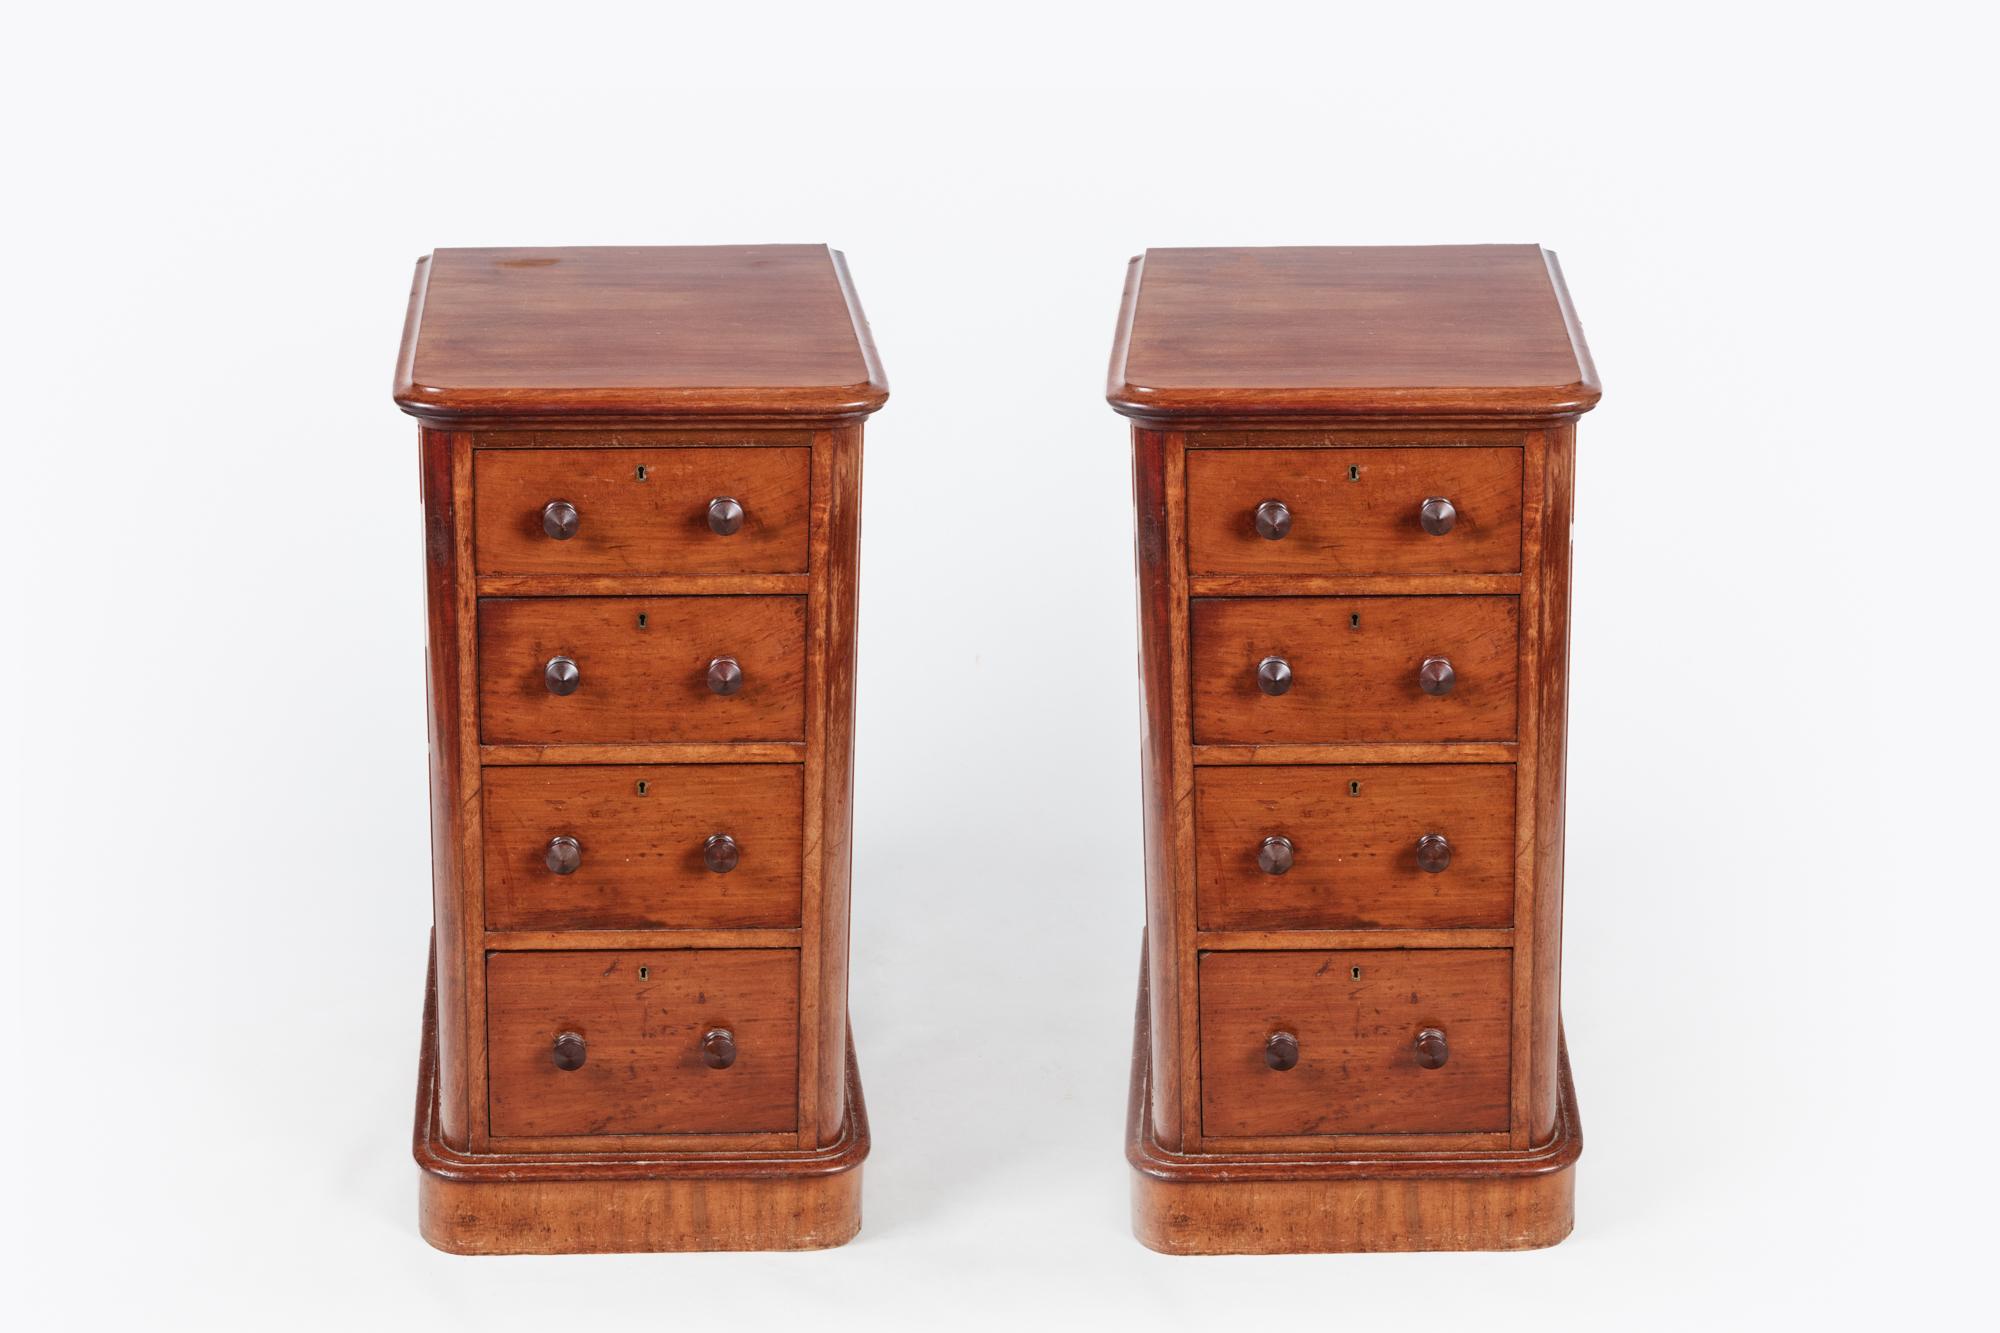 19th century pair of mahogany bedside lockers, the moulded top raised over four graduated drawers with two mahogany pulls and brass escutcheon terminating on moulded plinth base.